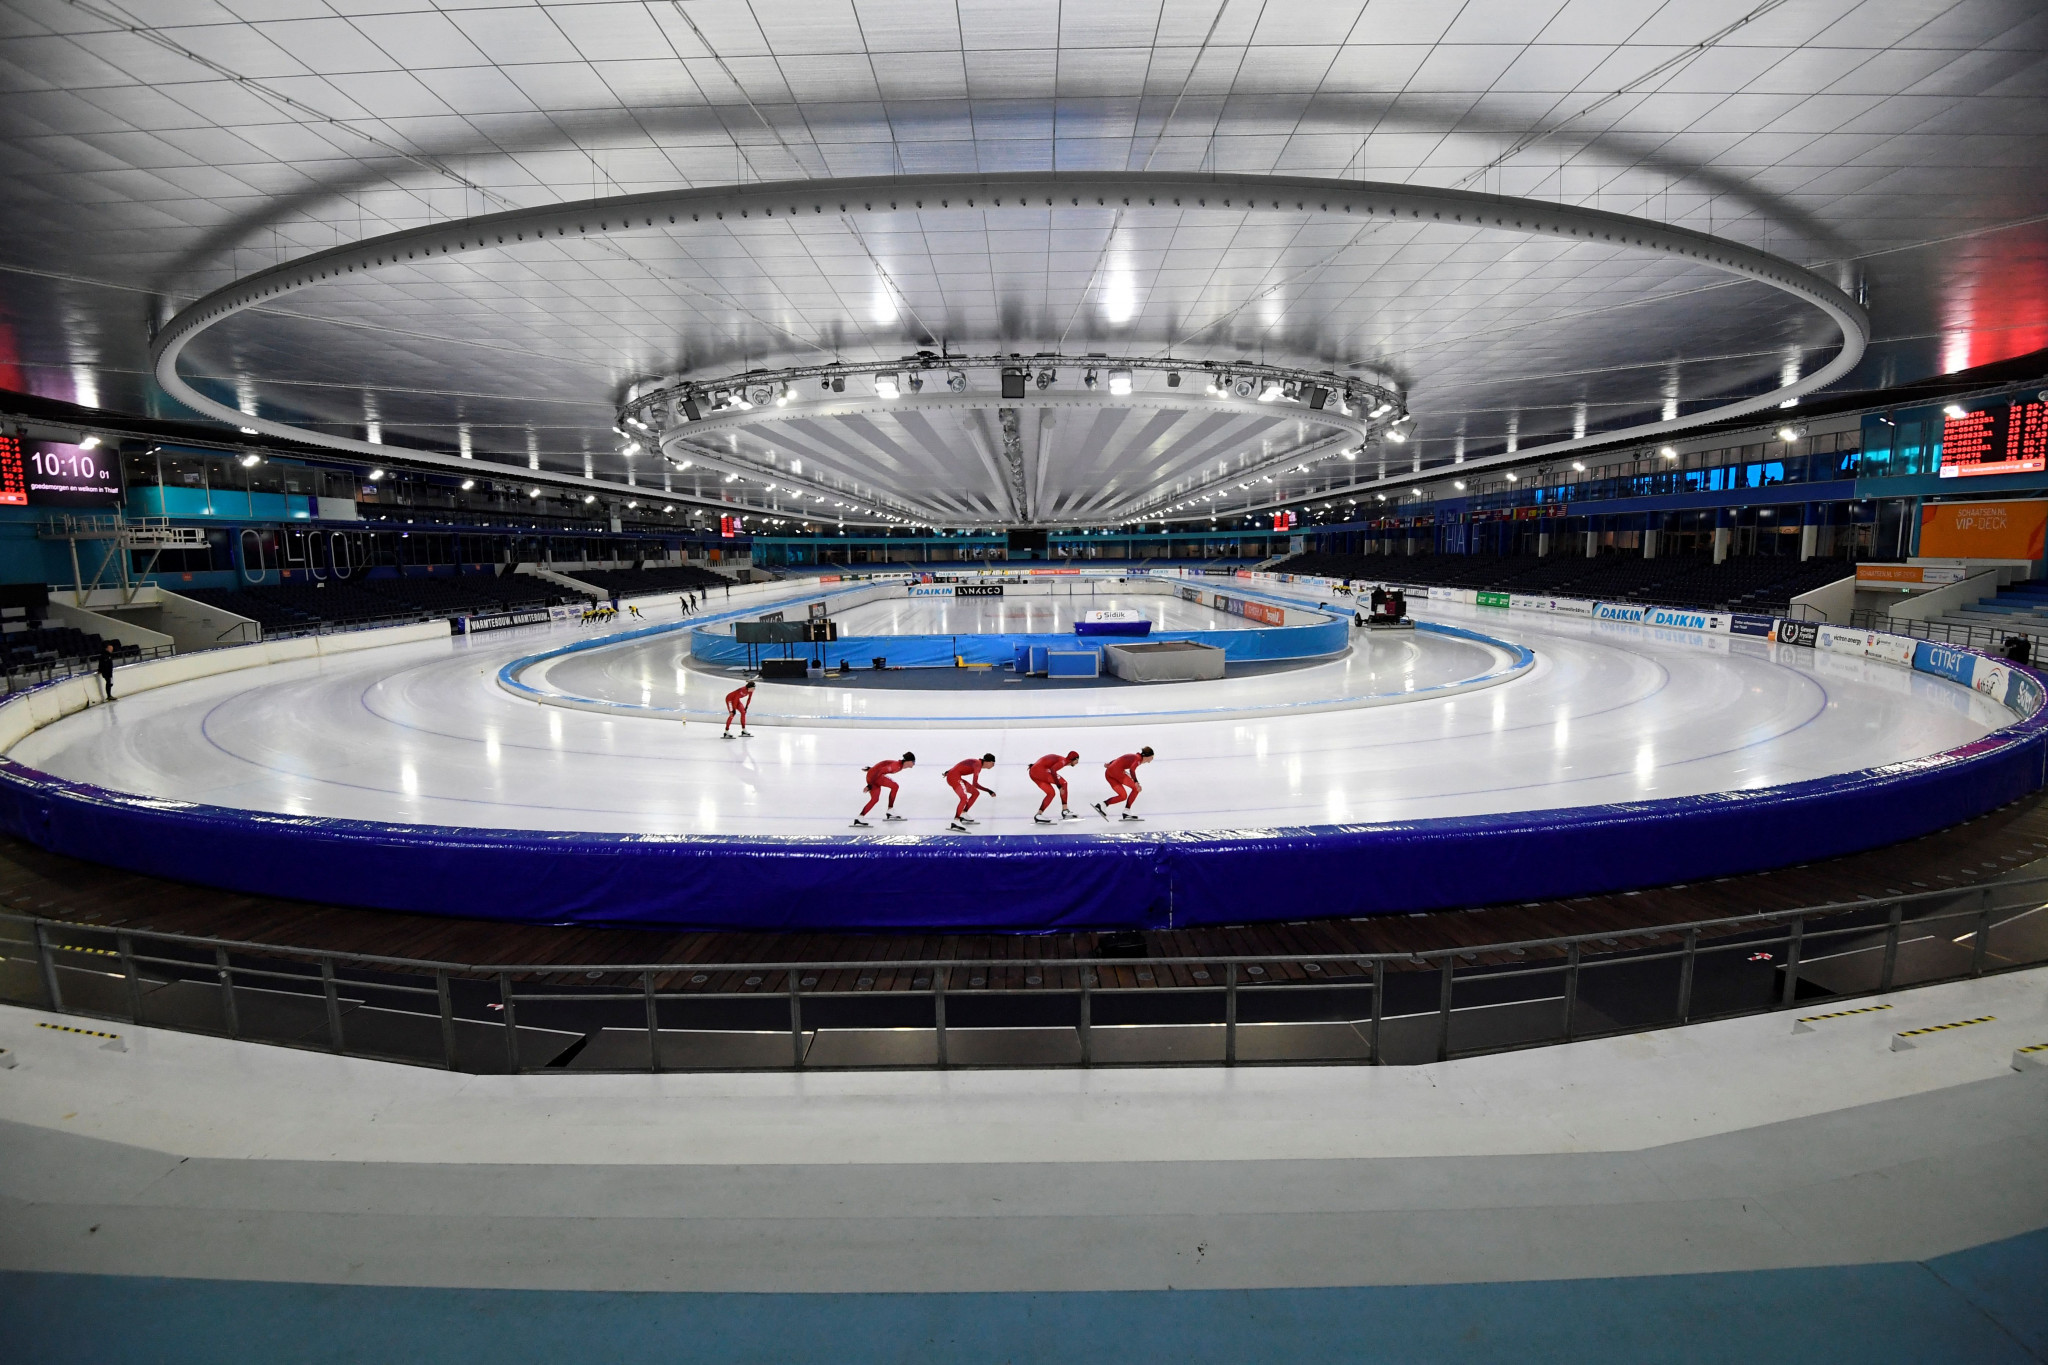 Full crowds return to Heerenveen as World Cup Speed Skating Final set to conclude season